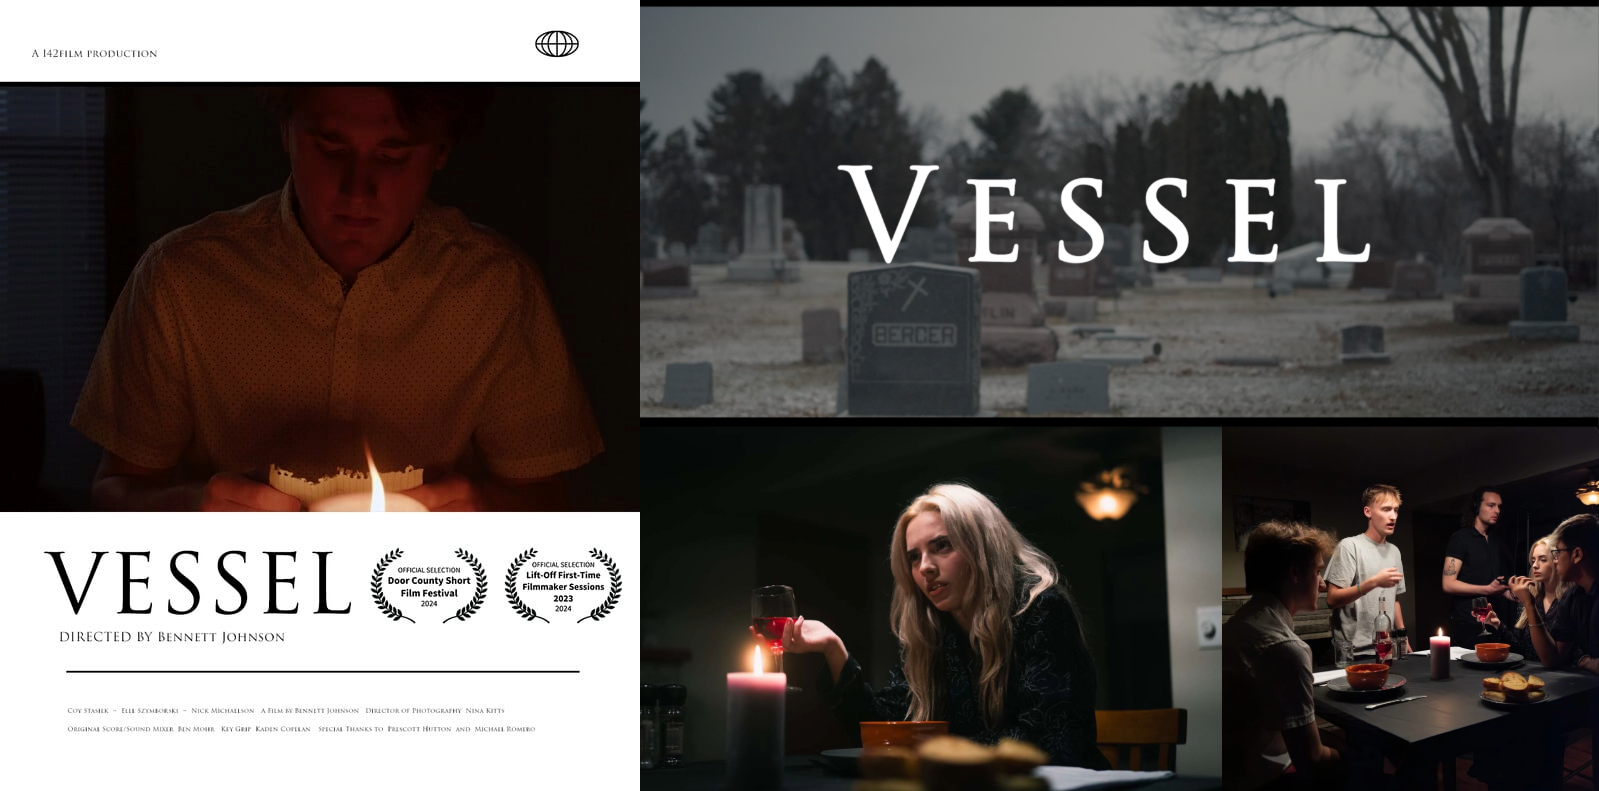 The poster and three images of the film Vessel. The poster shows a person lit by a candle holding a piece of torn notebook paper. The other images show a graveyard with the film's title over it, a girl hunched over a table with a candle on it, and a group of people standing around a table.